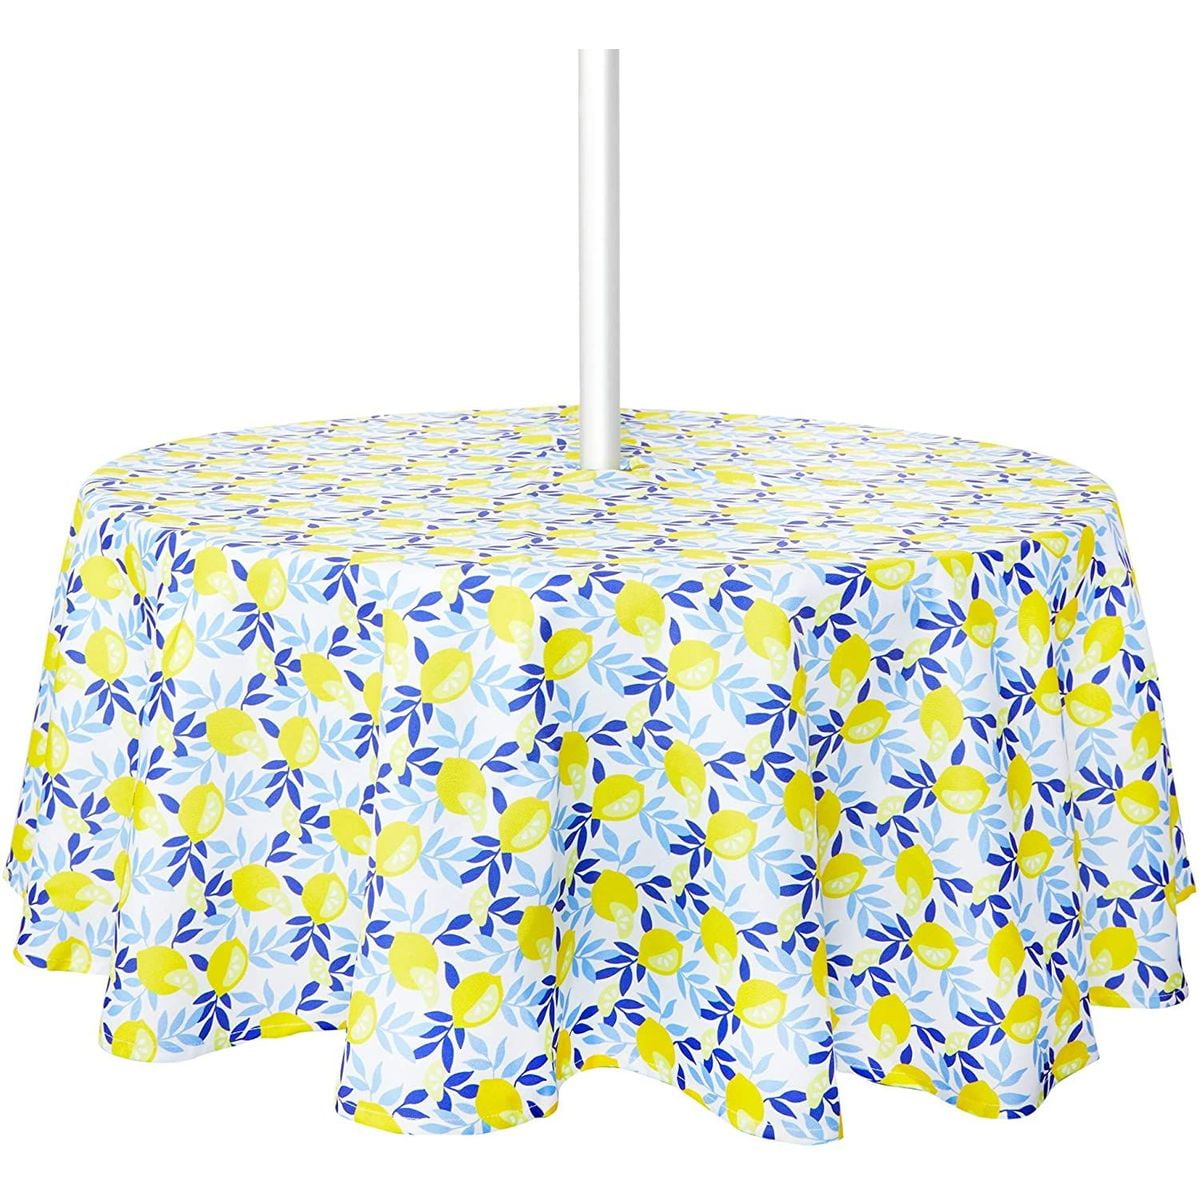 60 Square, Zippered, butterflyflower Outdoor Tablecloth Waterproof Spill-Proof Polyester Fabric Table Cover Lamberia Square Tablecloth with Umbrella Hole and Zipper for Patio Garden